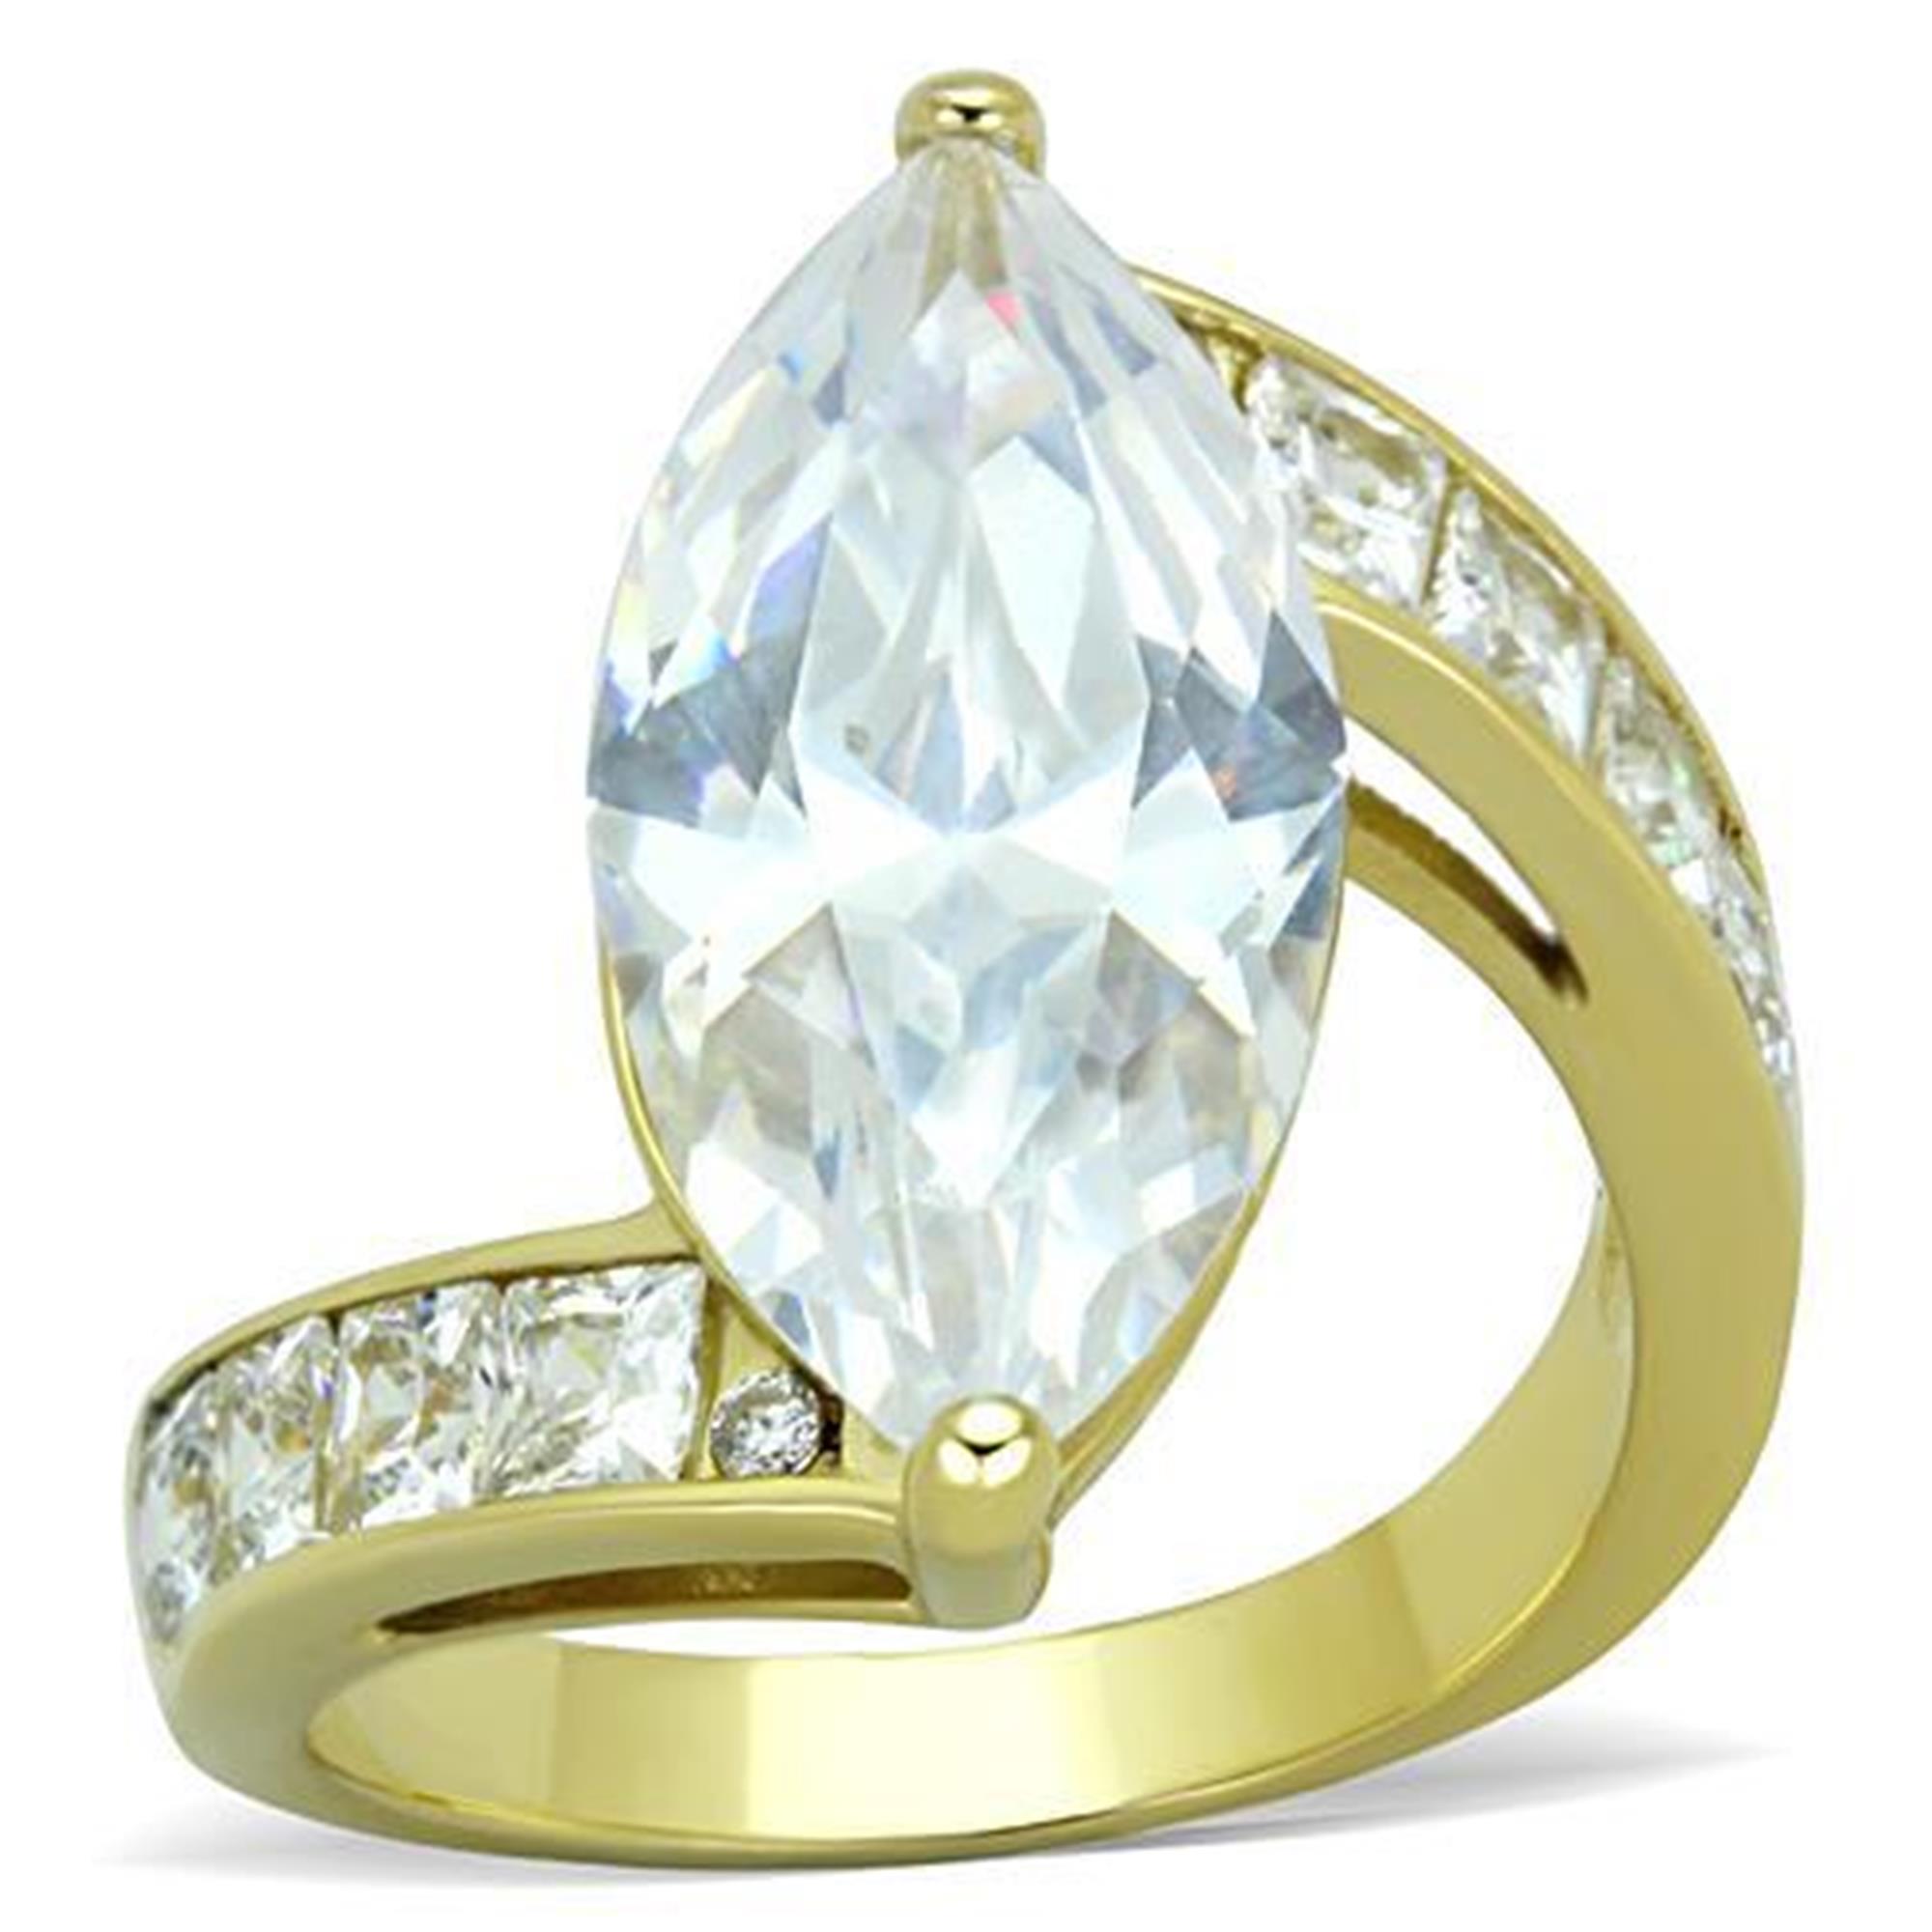 Luxe Jewelry Designs Women's Gold IP Stainless Steel Engagement Ring with Marquise Bezel AAA Grade Cubic Zirconia in Clear - Size 7